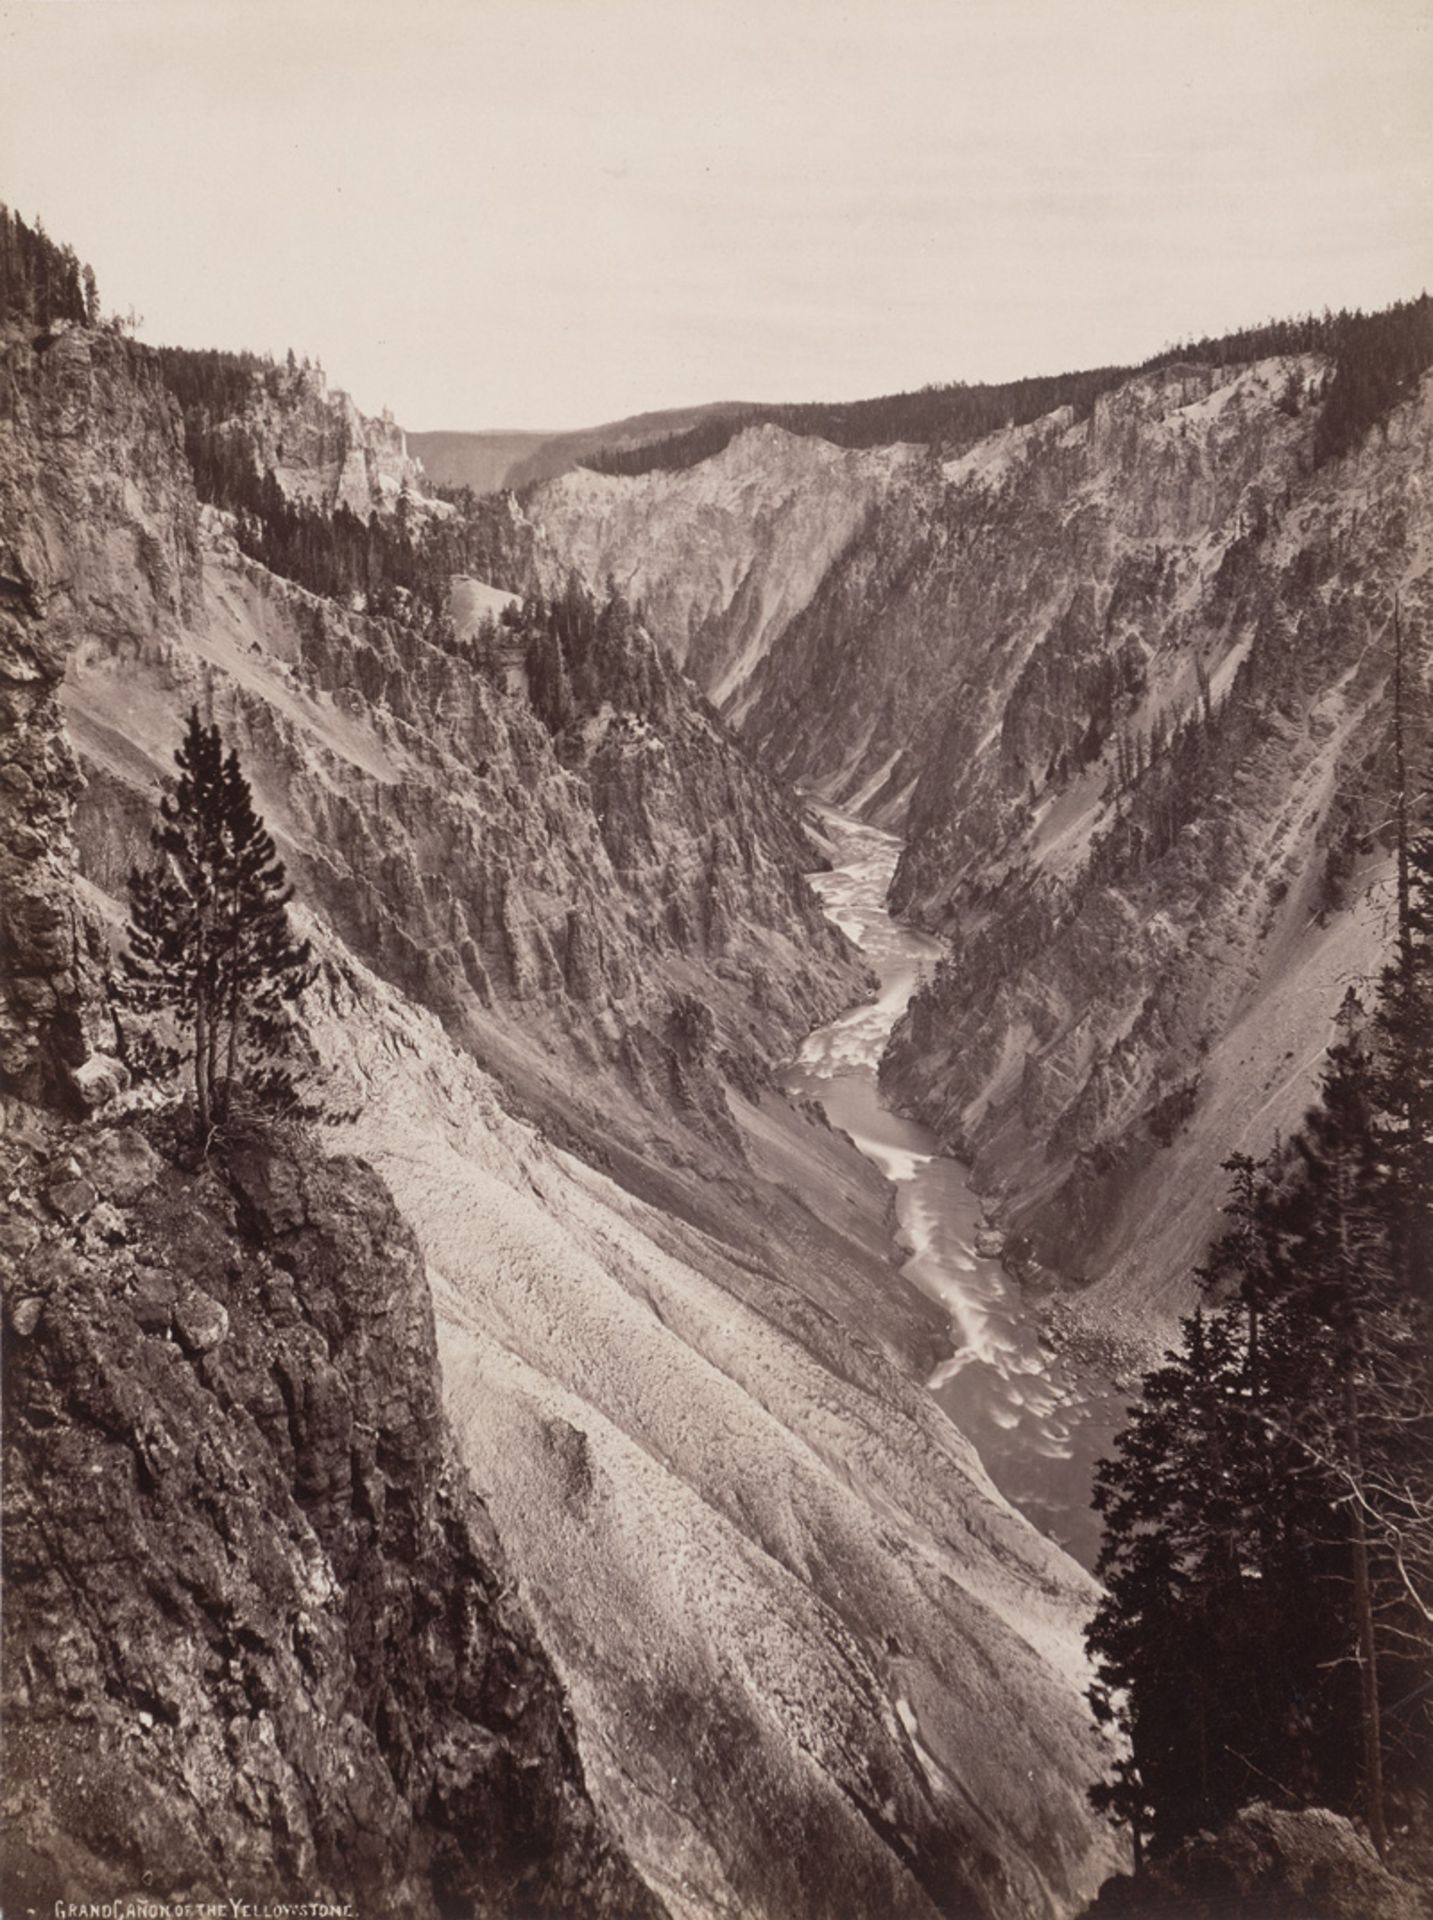 Jackson, William Henry: Grand Canyon of the Yellowstone